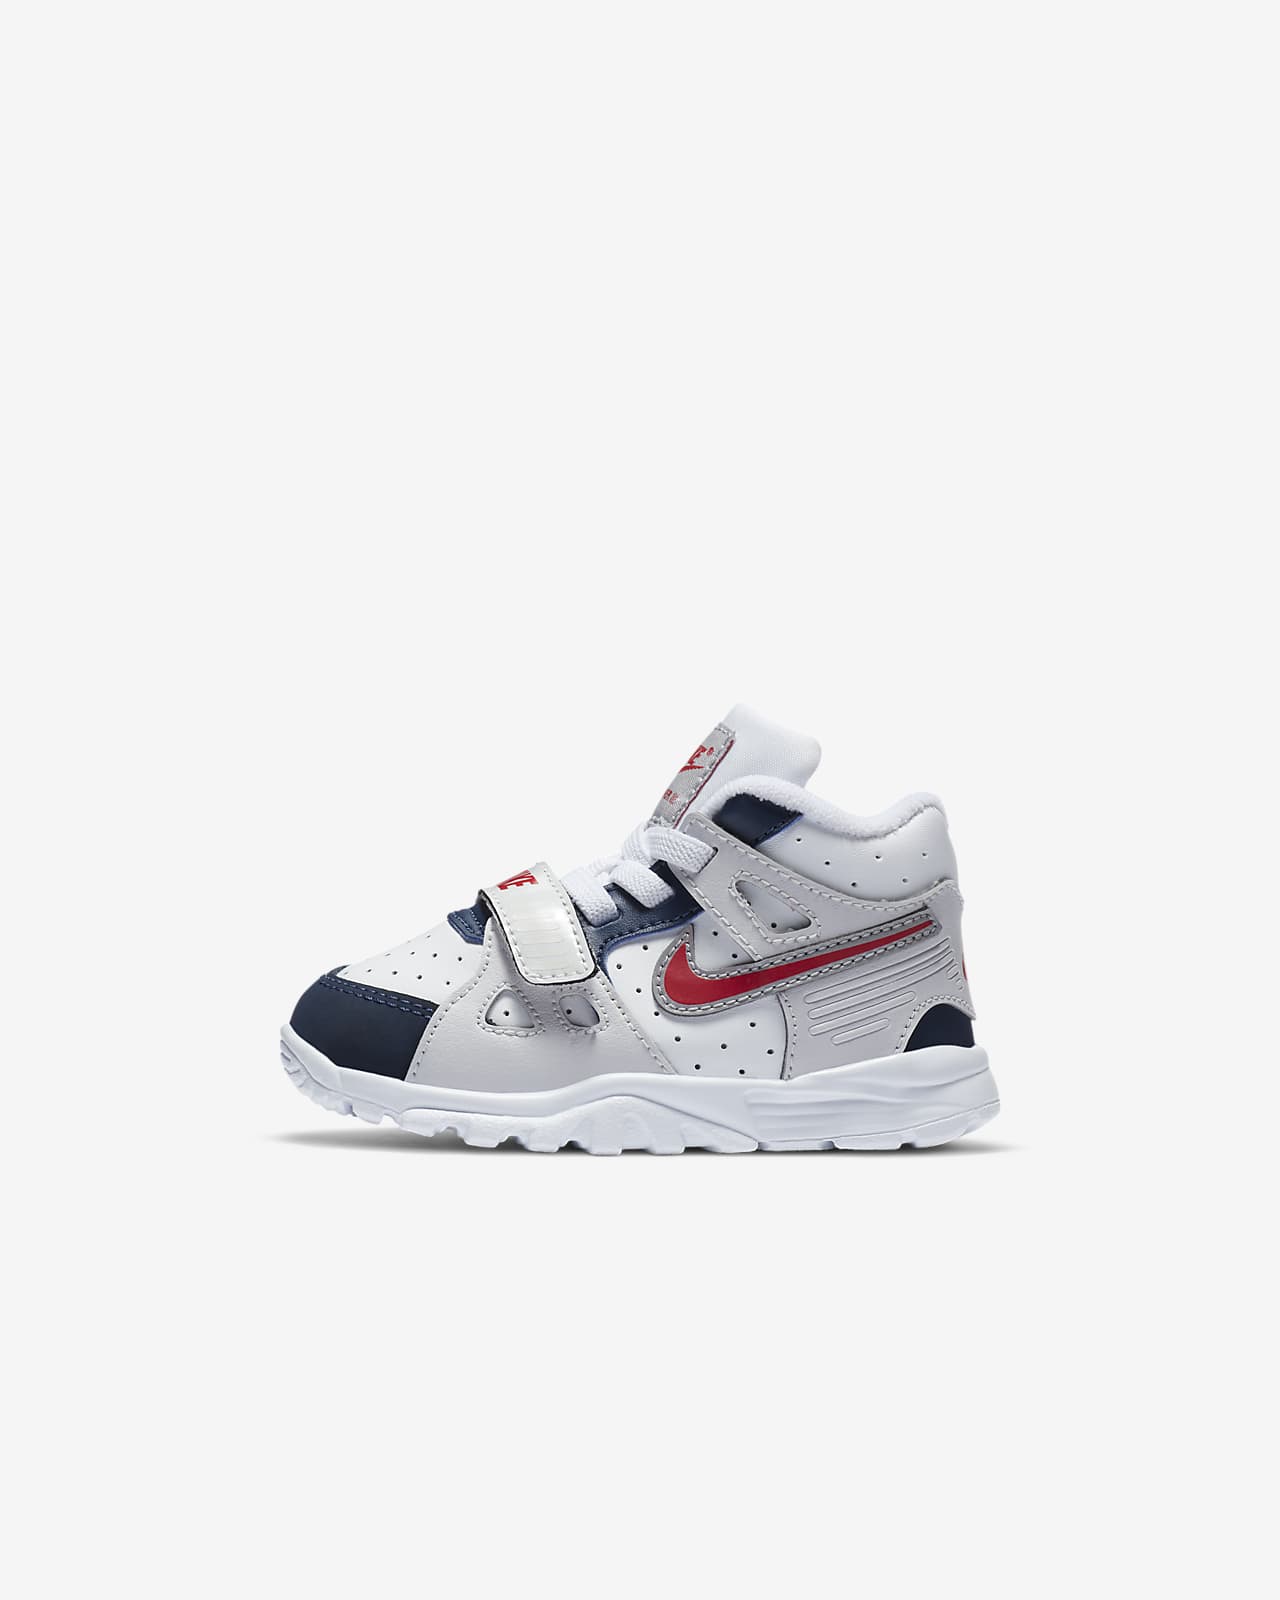 Nike Trainer 3 Baby and Toddler Shoe 